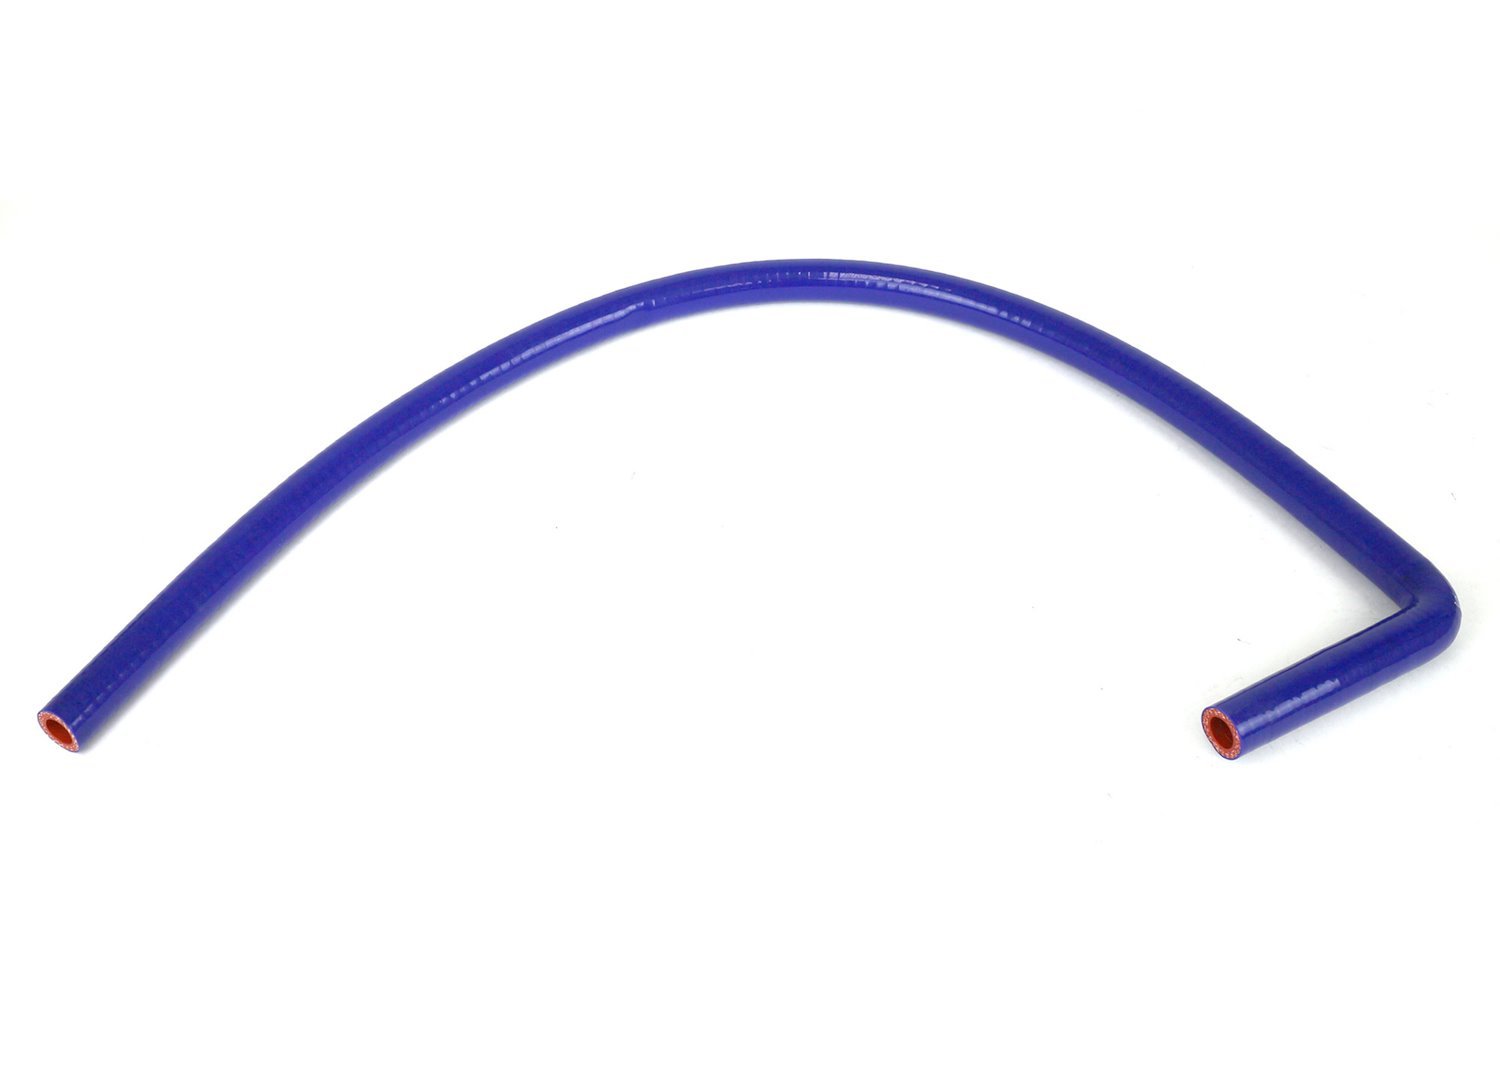 HTSEC90-038-L5x36-BLUE Silicone Coupler, 90-Deg. Silicone Coupler, High-Temp 4-Ply Reinforced, 3/8 in. ID, 5 in. & 36 in. Legs